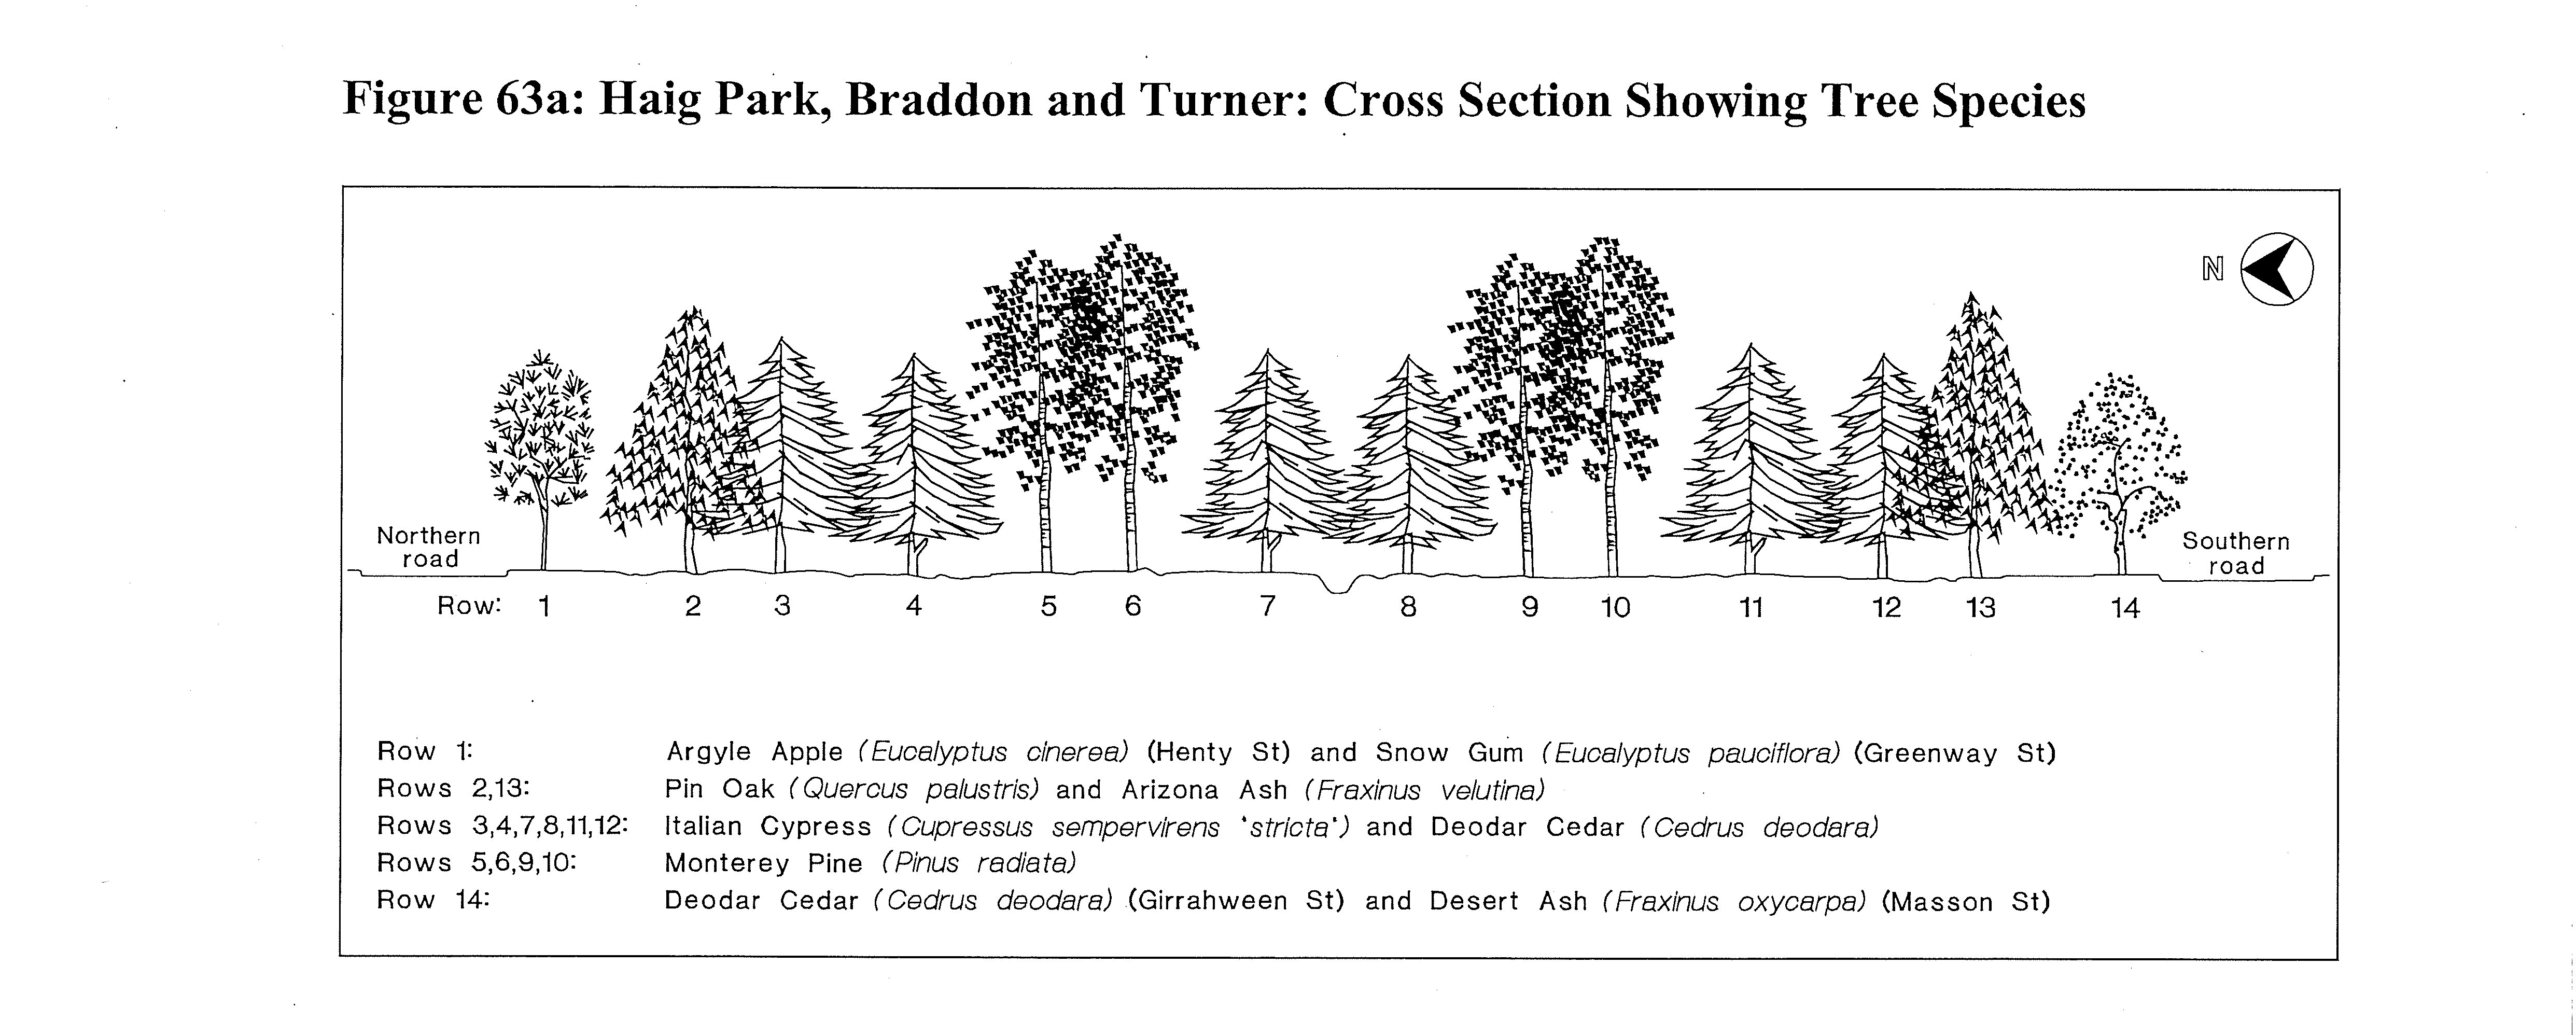 The below shows the cross-section of trees in the heritage listing for Haig Park. 